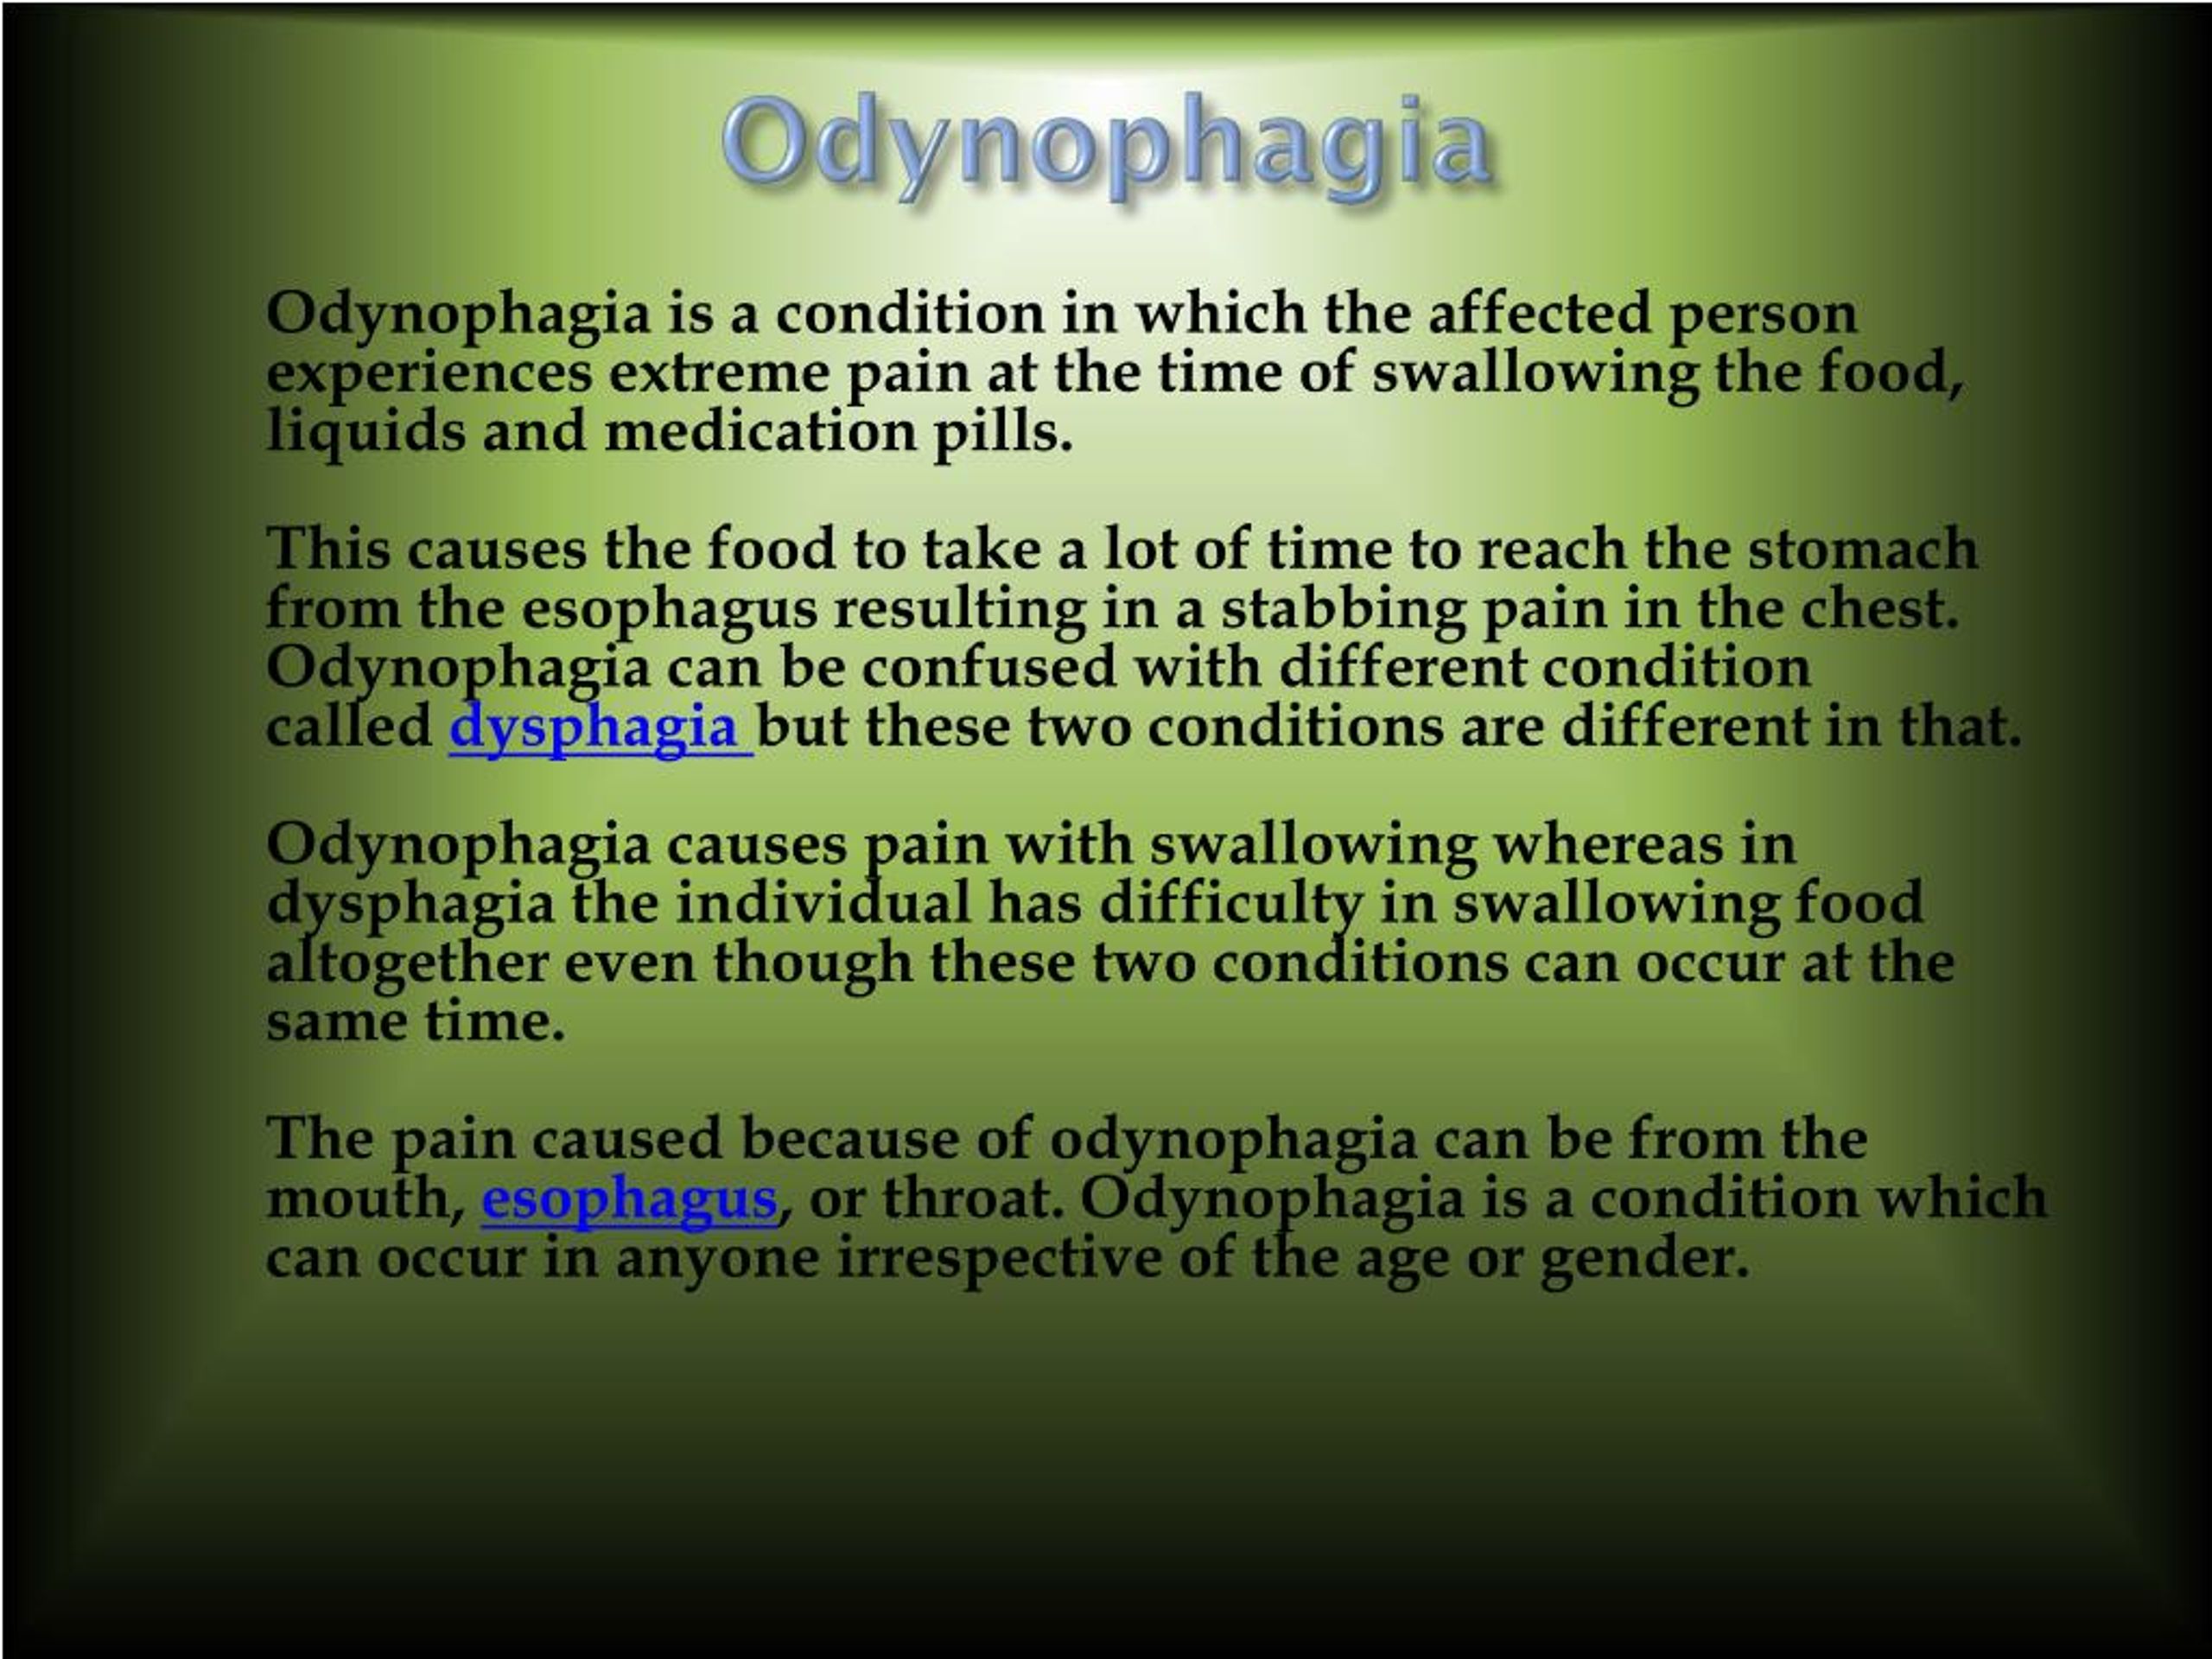 Ppt Odynophagia Causes Symptoms Daignosis Prevention And 